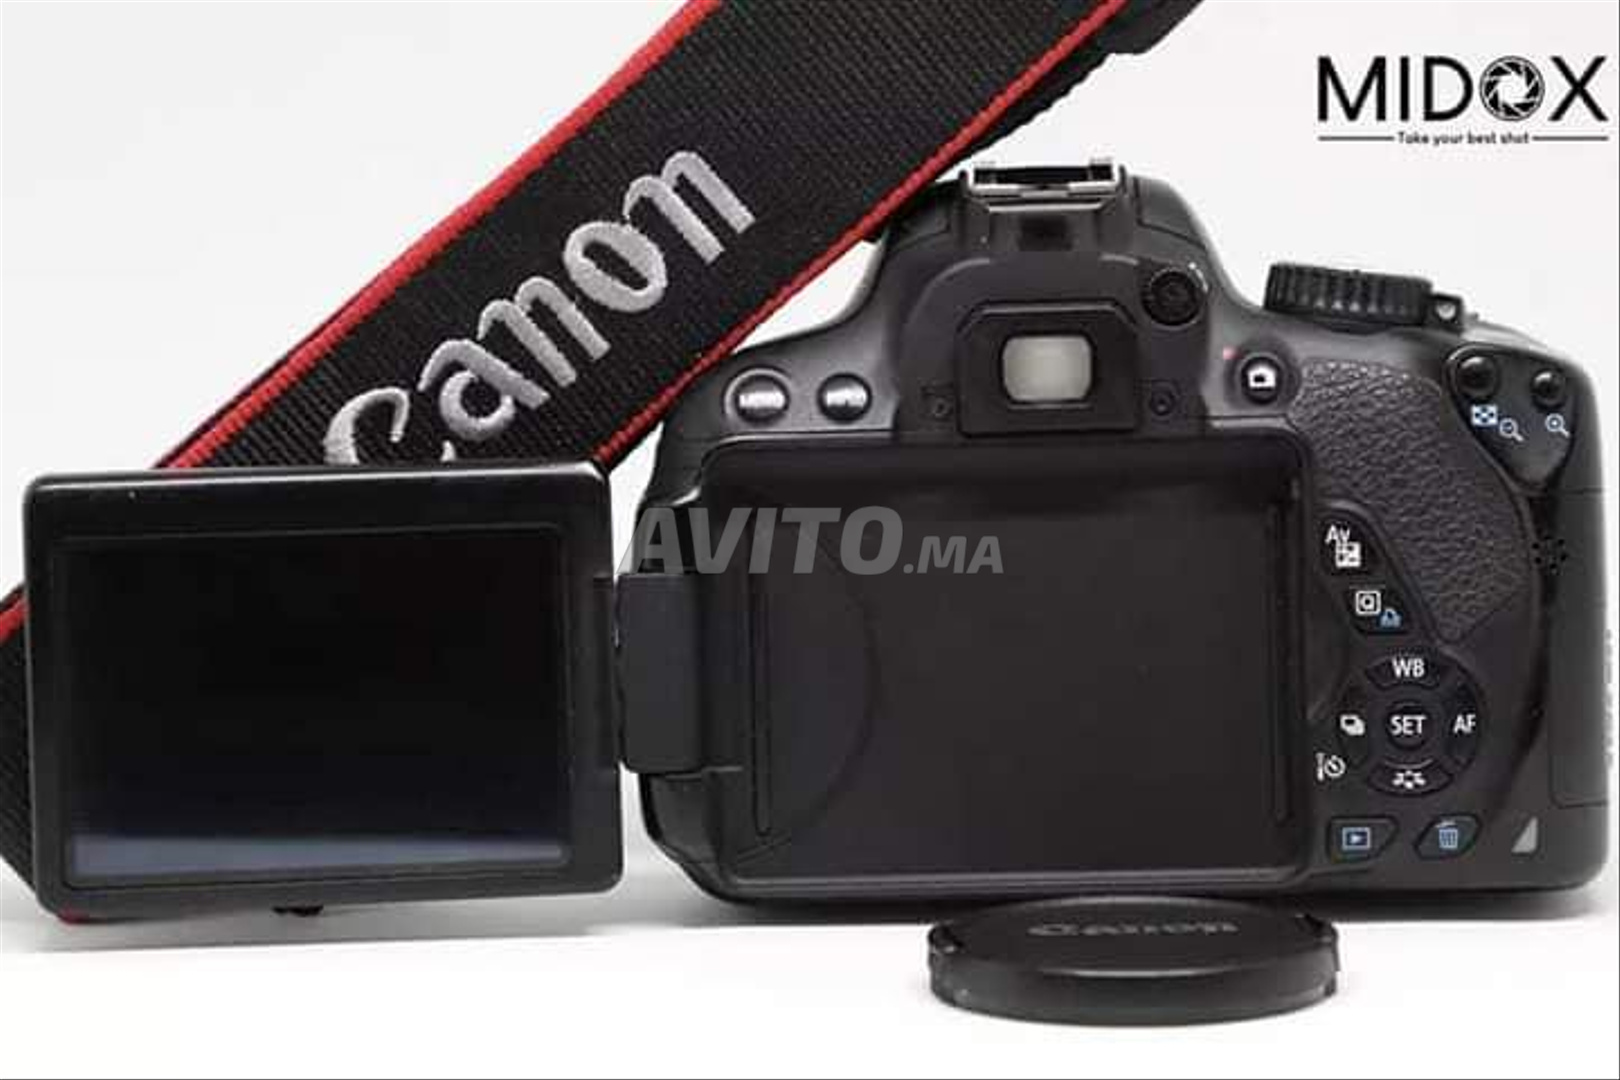 Canon 650D 18-55mm PROMOTION MAGASIN Midox SHOP - 2